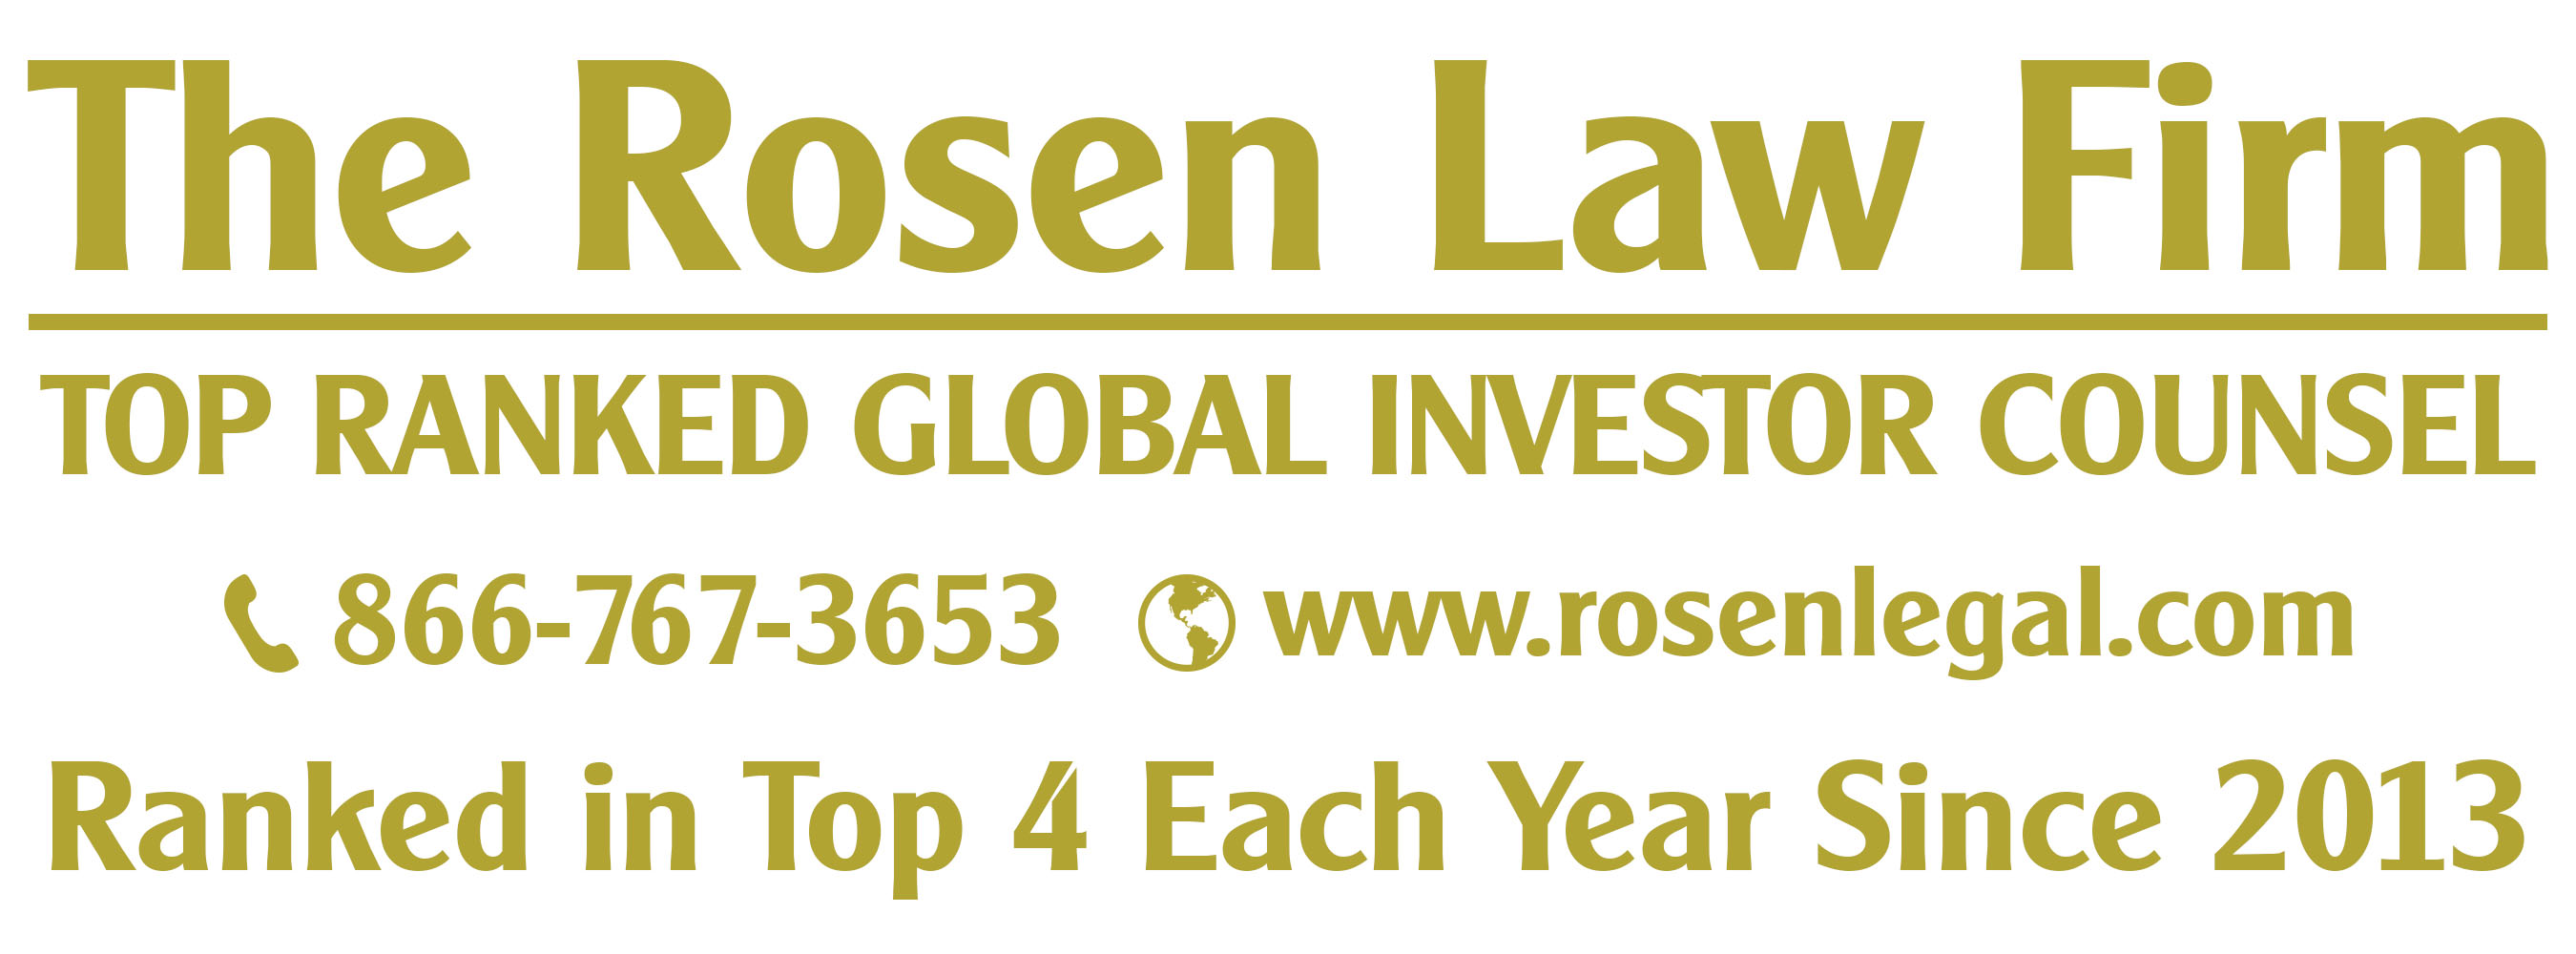 Rosen Law Firm PA, Tuesday, November 22, 2022, Press release picture